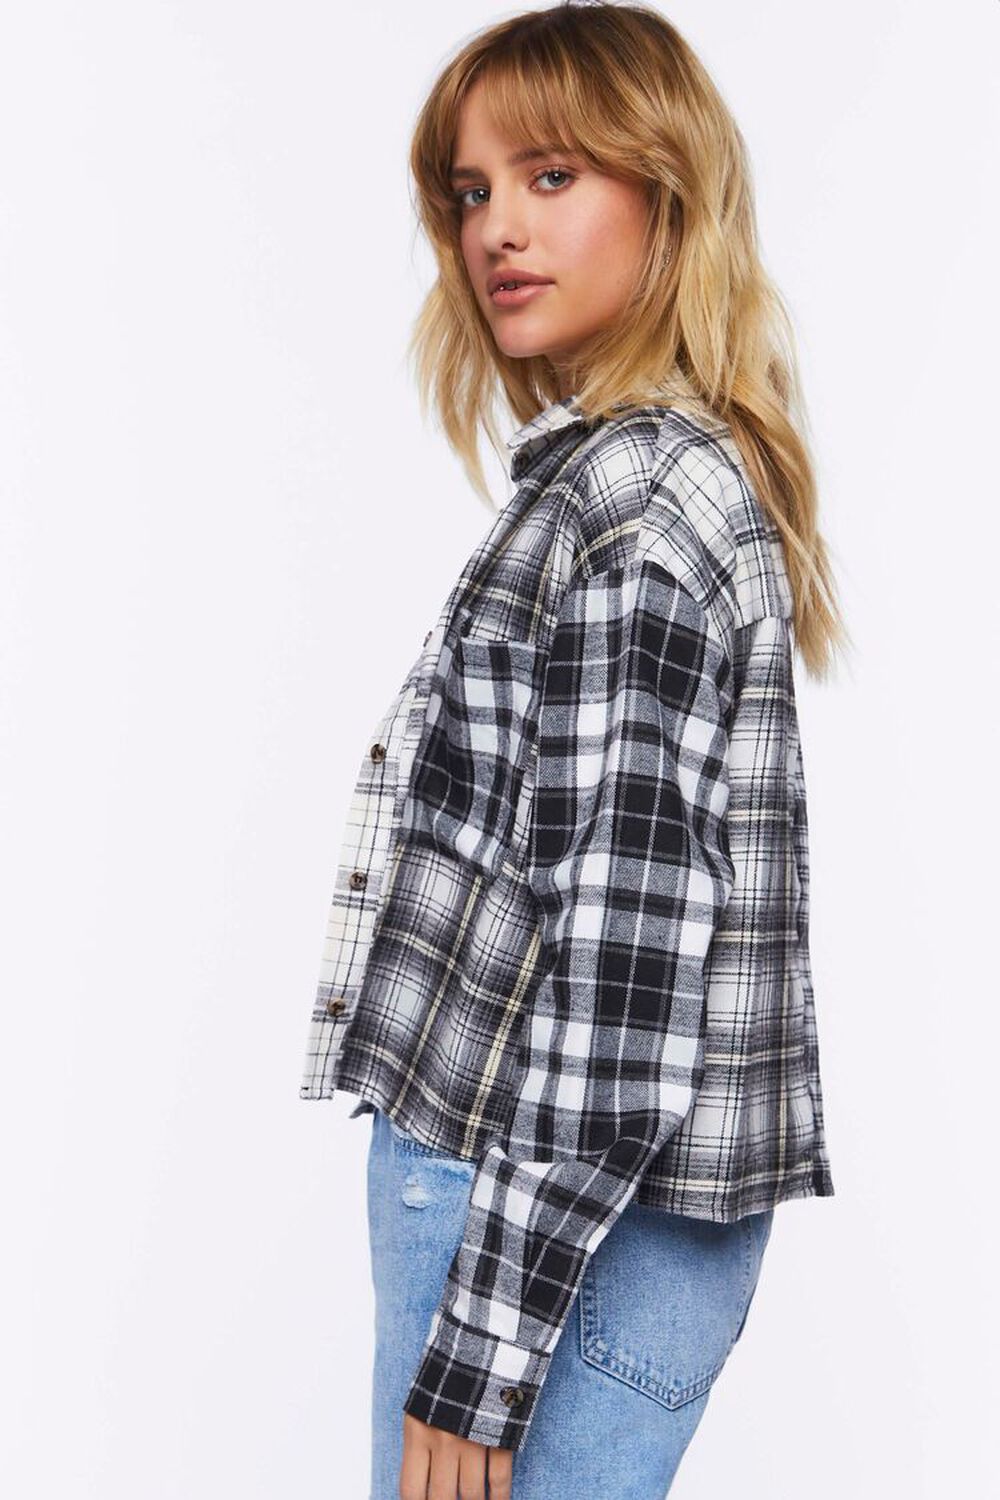 Reworked Mixed Plaid Flannel Shirt, image 2